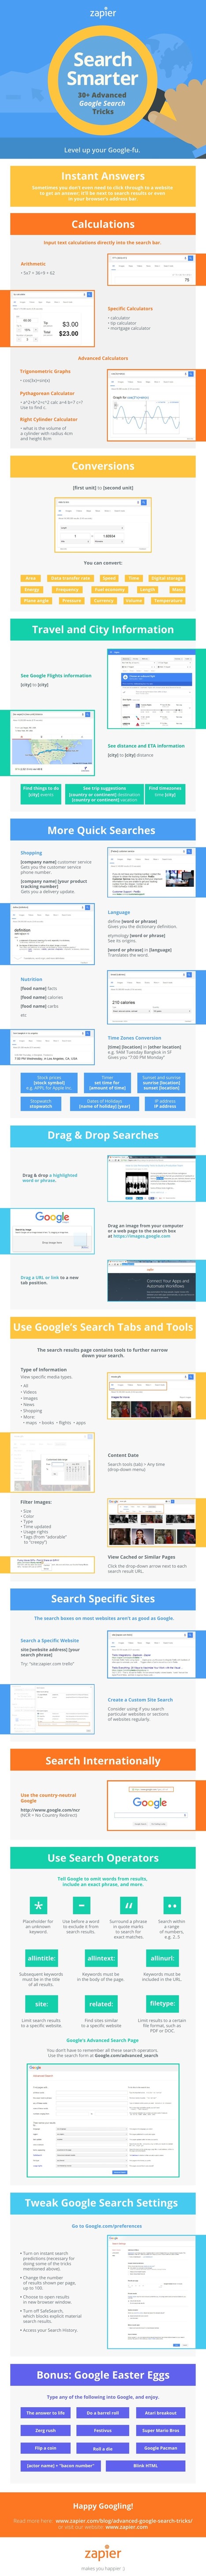 A New Infographic Featuring 30+ Practical Google Search Tips ~ Educational Technology and Mobile Learning | Moodle and Web 2.0 | Scoop.it